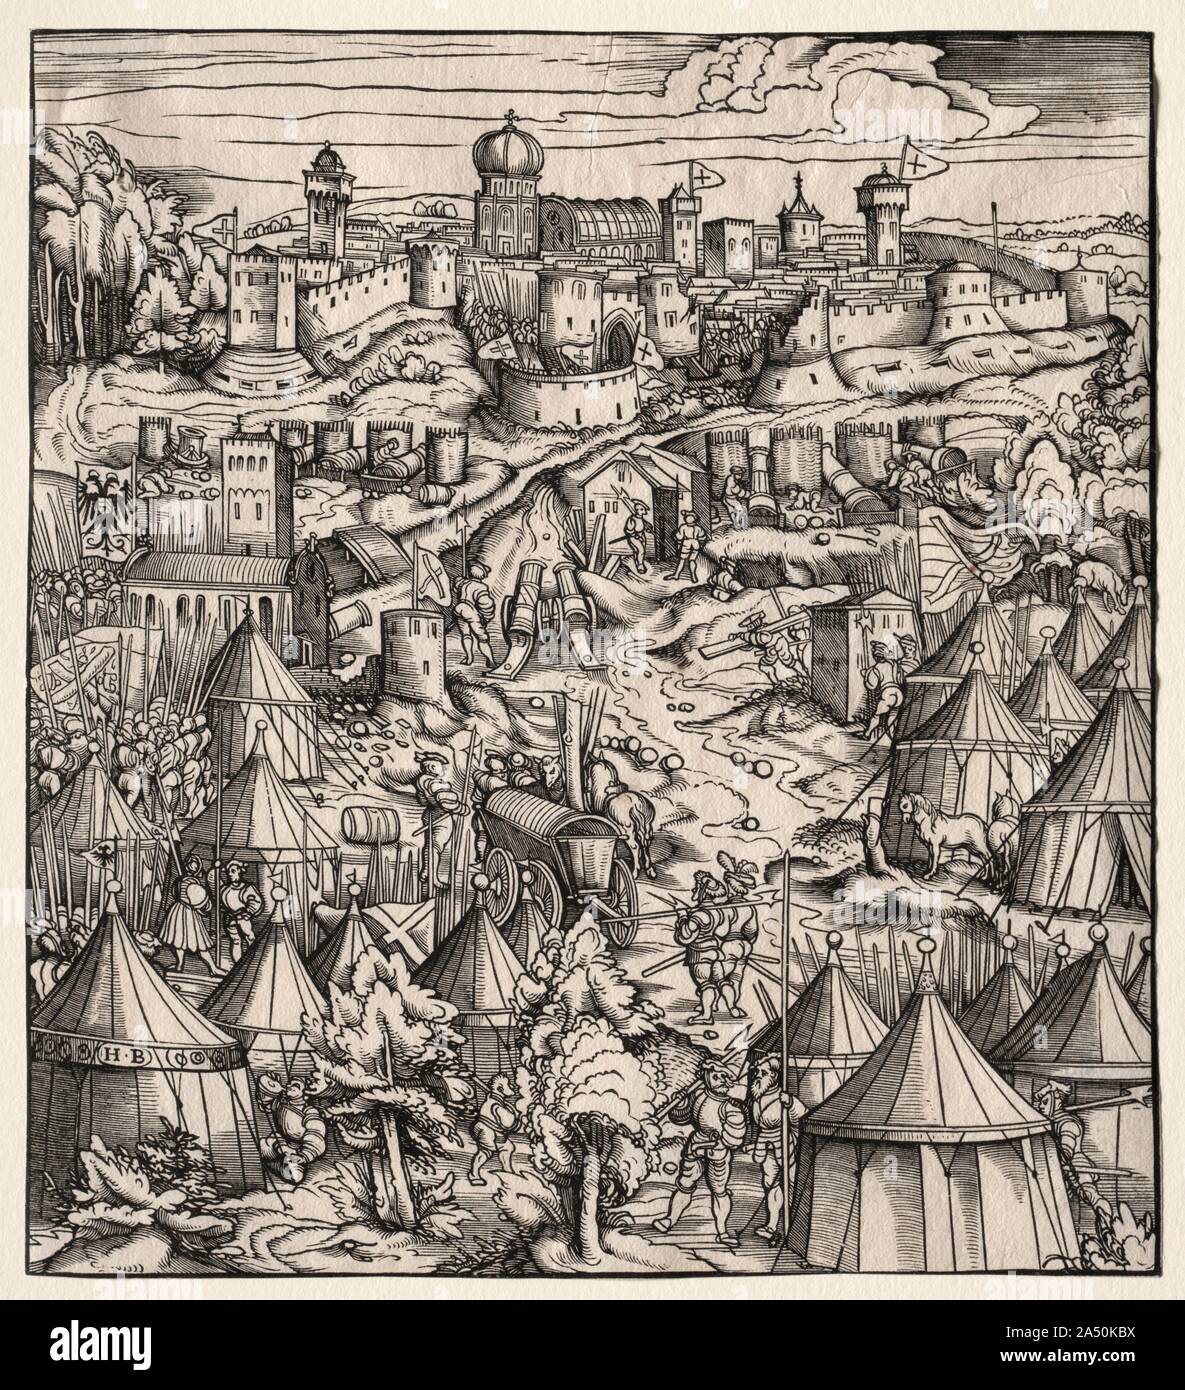 Der Weisskunig (The White King): The Siege of Padua, 1512-1515. These woodcuts depicting military campaigns are illustrations for  Der Weisskunig , or  The White King , a fictionalized biography of Holy Roman Emperor Maximilian I (reigned 1486-1519). Written in German, the book takes the form of a courtly romance novel featuring armored knights. The hero, Maximilian, is the White King. The Blue King and his party represent France. Maximilian was the earliest Renaissance prince to extensively use printed images and texts to cultivate his authority and spread his ideology.  Der Weisskunig  is on Stock Photo